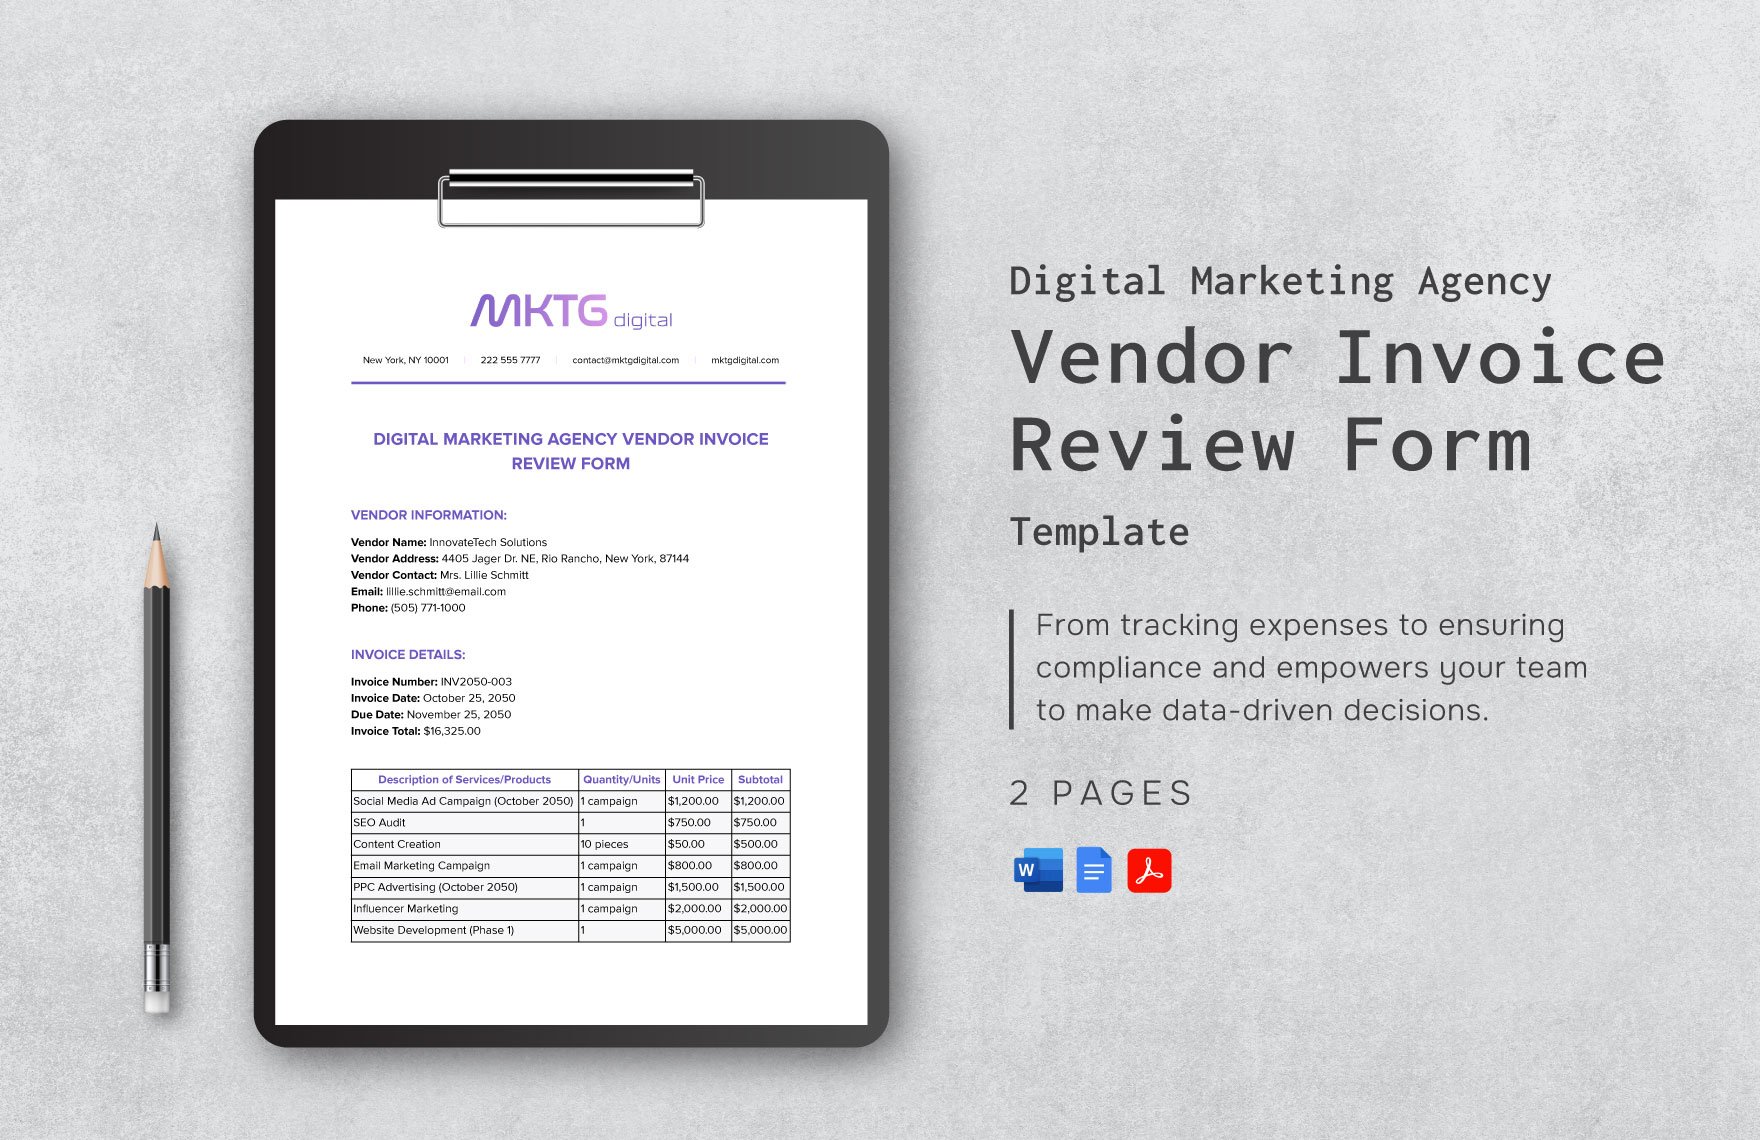 Digital Marketing Agency Vendor Invoice Review Form Template in Word, Google Docs, PDF